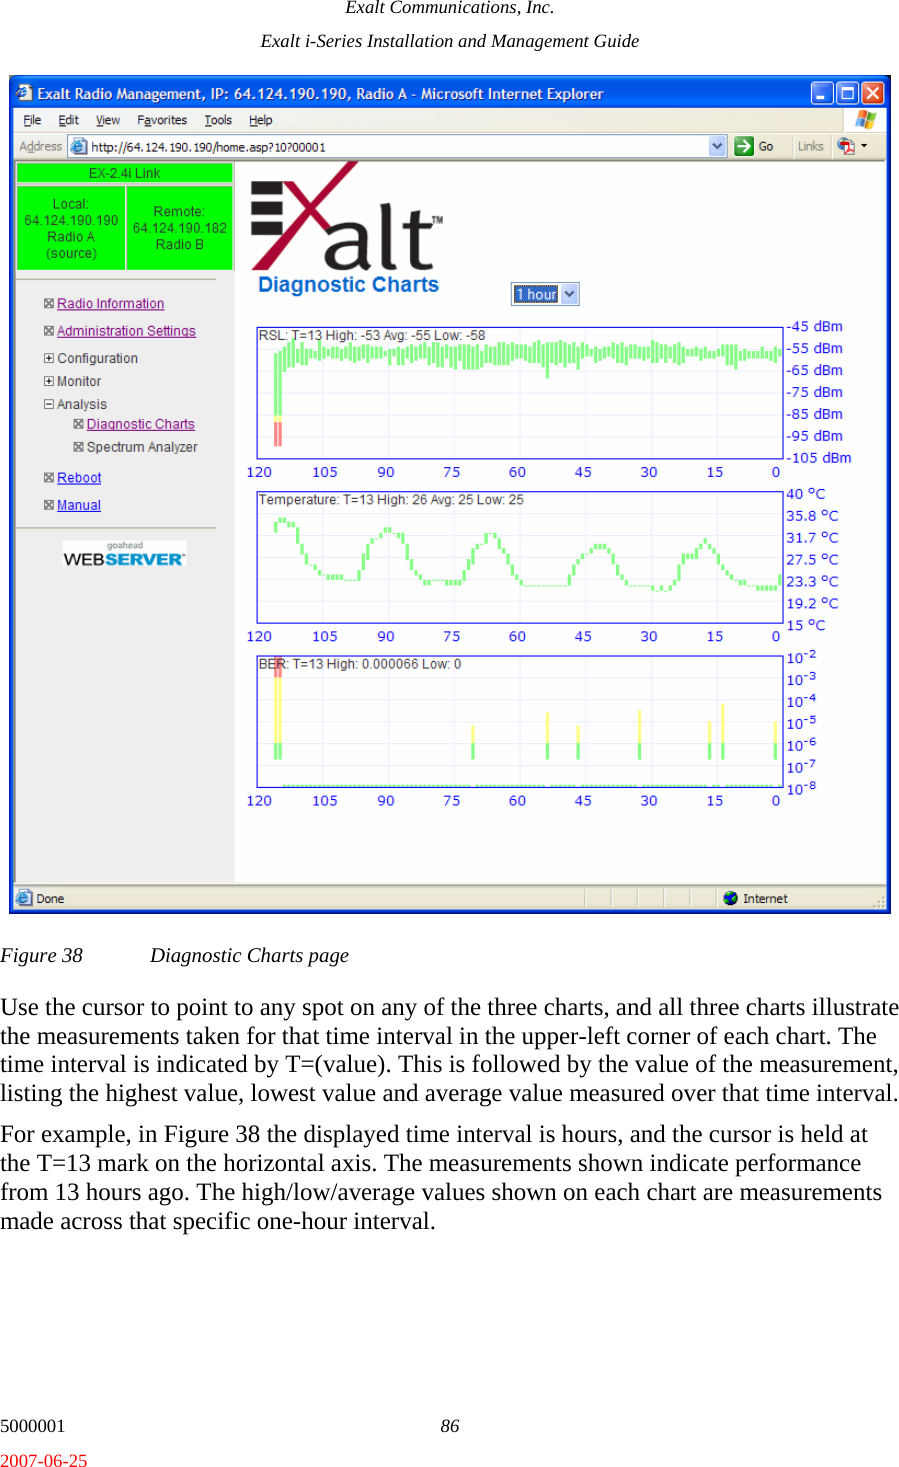 Exalt Communications, Inc. Exalt i-Series Installation and Management Guide 5000001  86 2007-06-25 Figure 38  Diagnostic Charts page Use the cursor to point to any spot on any of the three charts, and all three charts illustrate the measurements taken for that time interval in the upper-left corner of each chart. The time interval is indicated by T=(value). This is followed by the value of the measurement, listing the highest value, lowest value and average value measured over that time interval. For example, in Figure 38 the displayed time interval is hours, and the cursor is held at the T=13 mark on the horizontal axis. The measurements shown indicate performance from 13 hours ago. The high/low/average values shown on each chart are measurements made across that specific one-hour interval. 